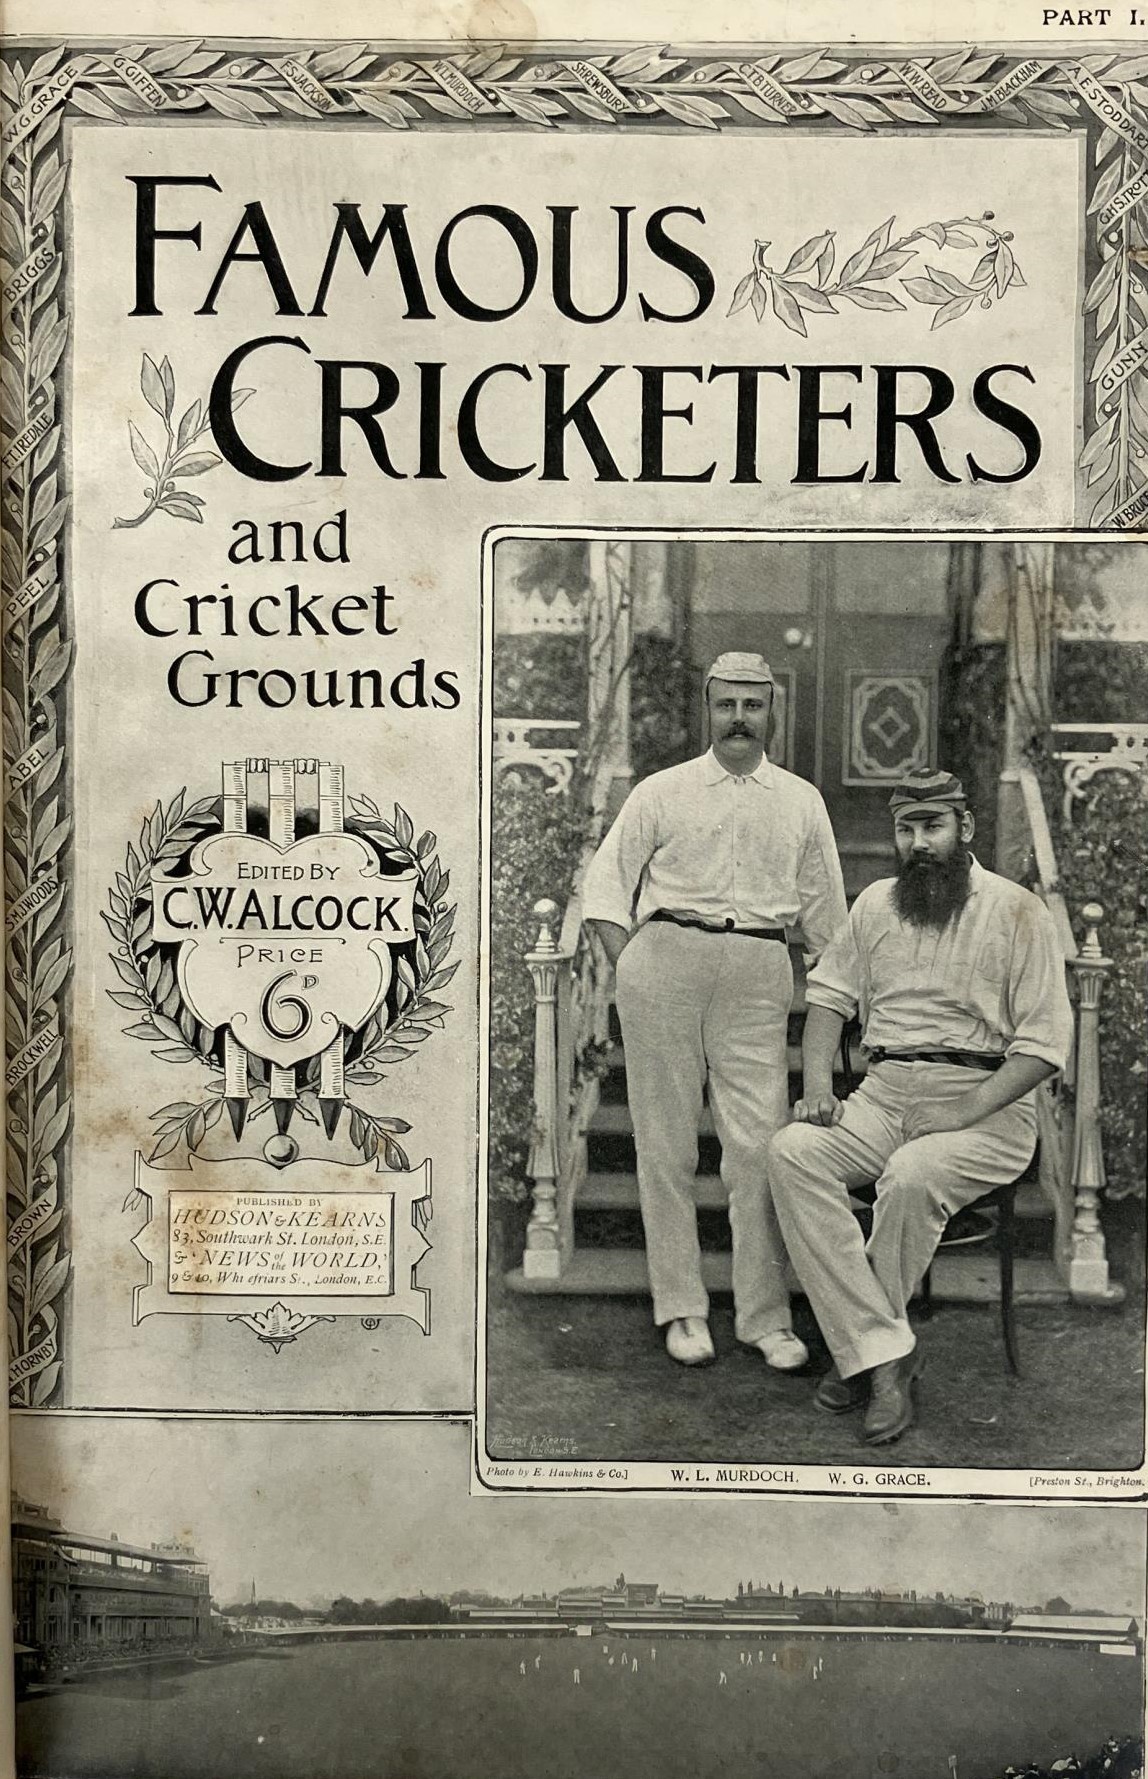 Cricket Of Today Illustrated, 2 vols., The Book Of Cricket, and Famous Cricketers, assorted sporting - Image 5 of 12